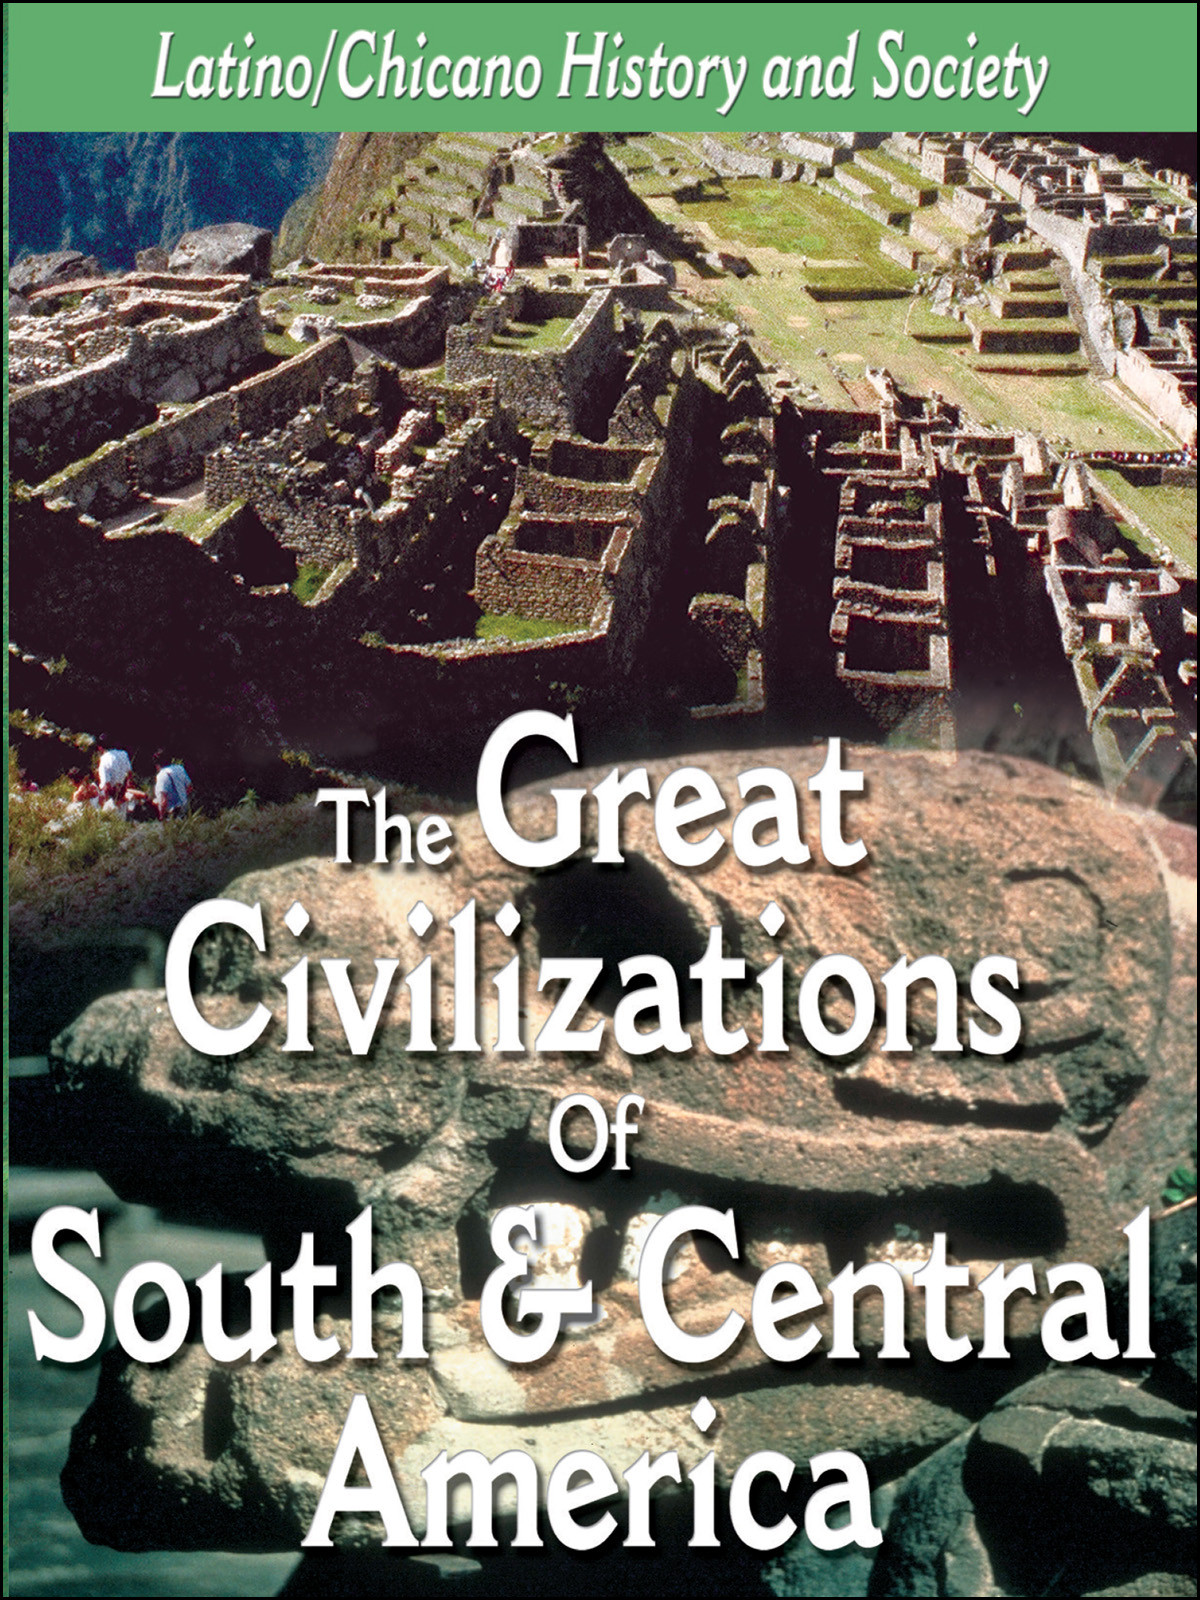 L910 - The Great Civilizations of South & Central America